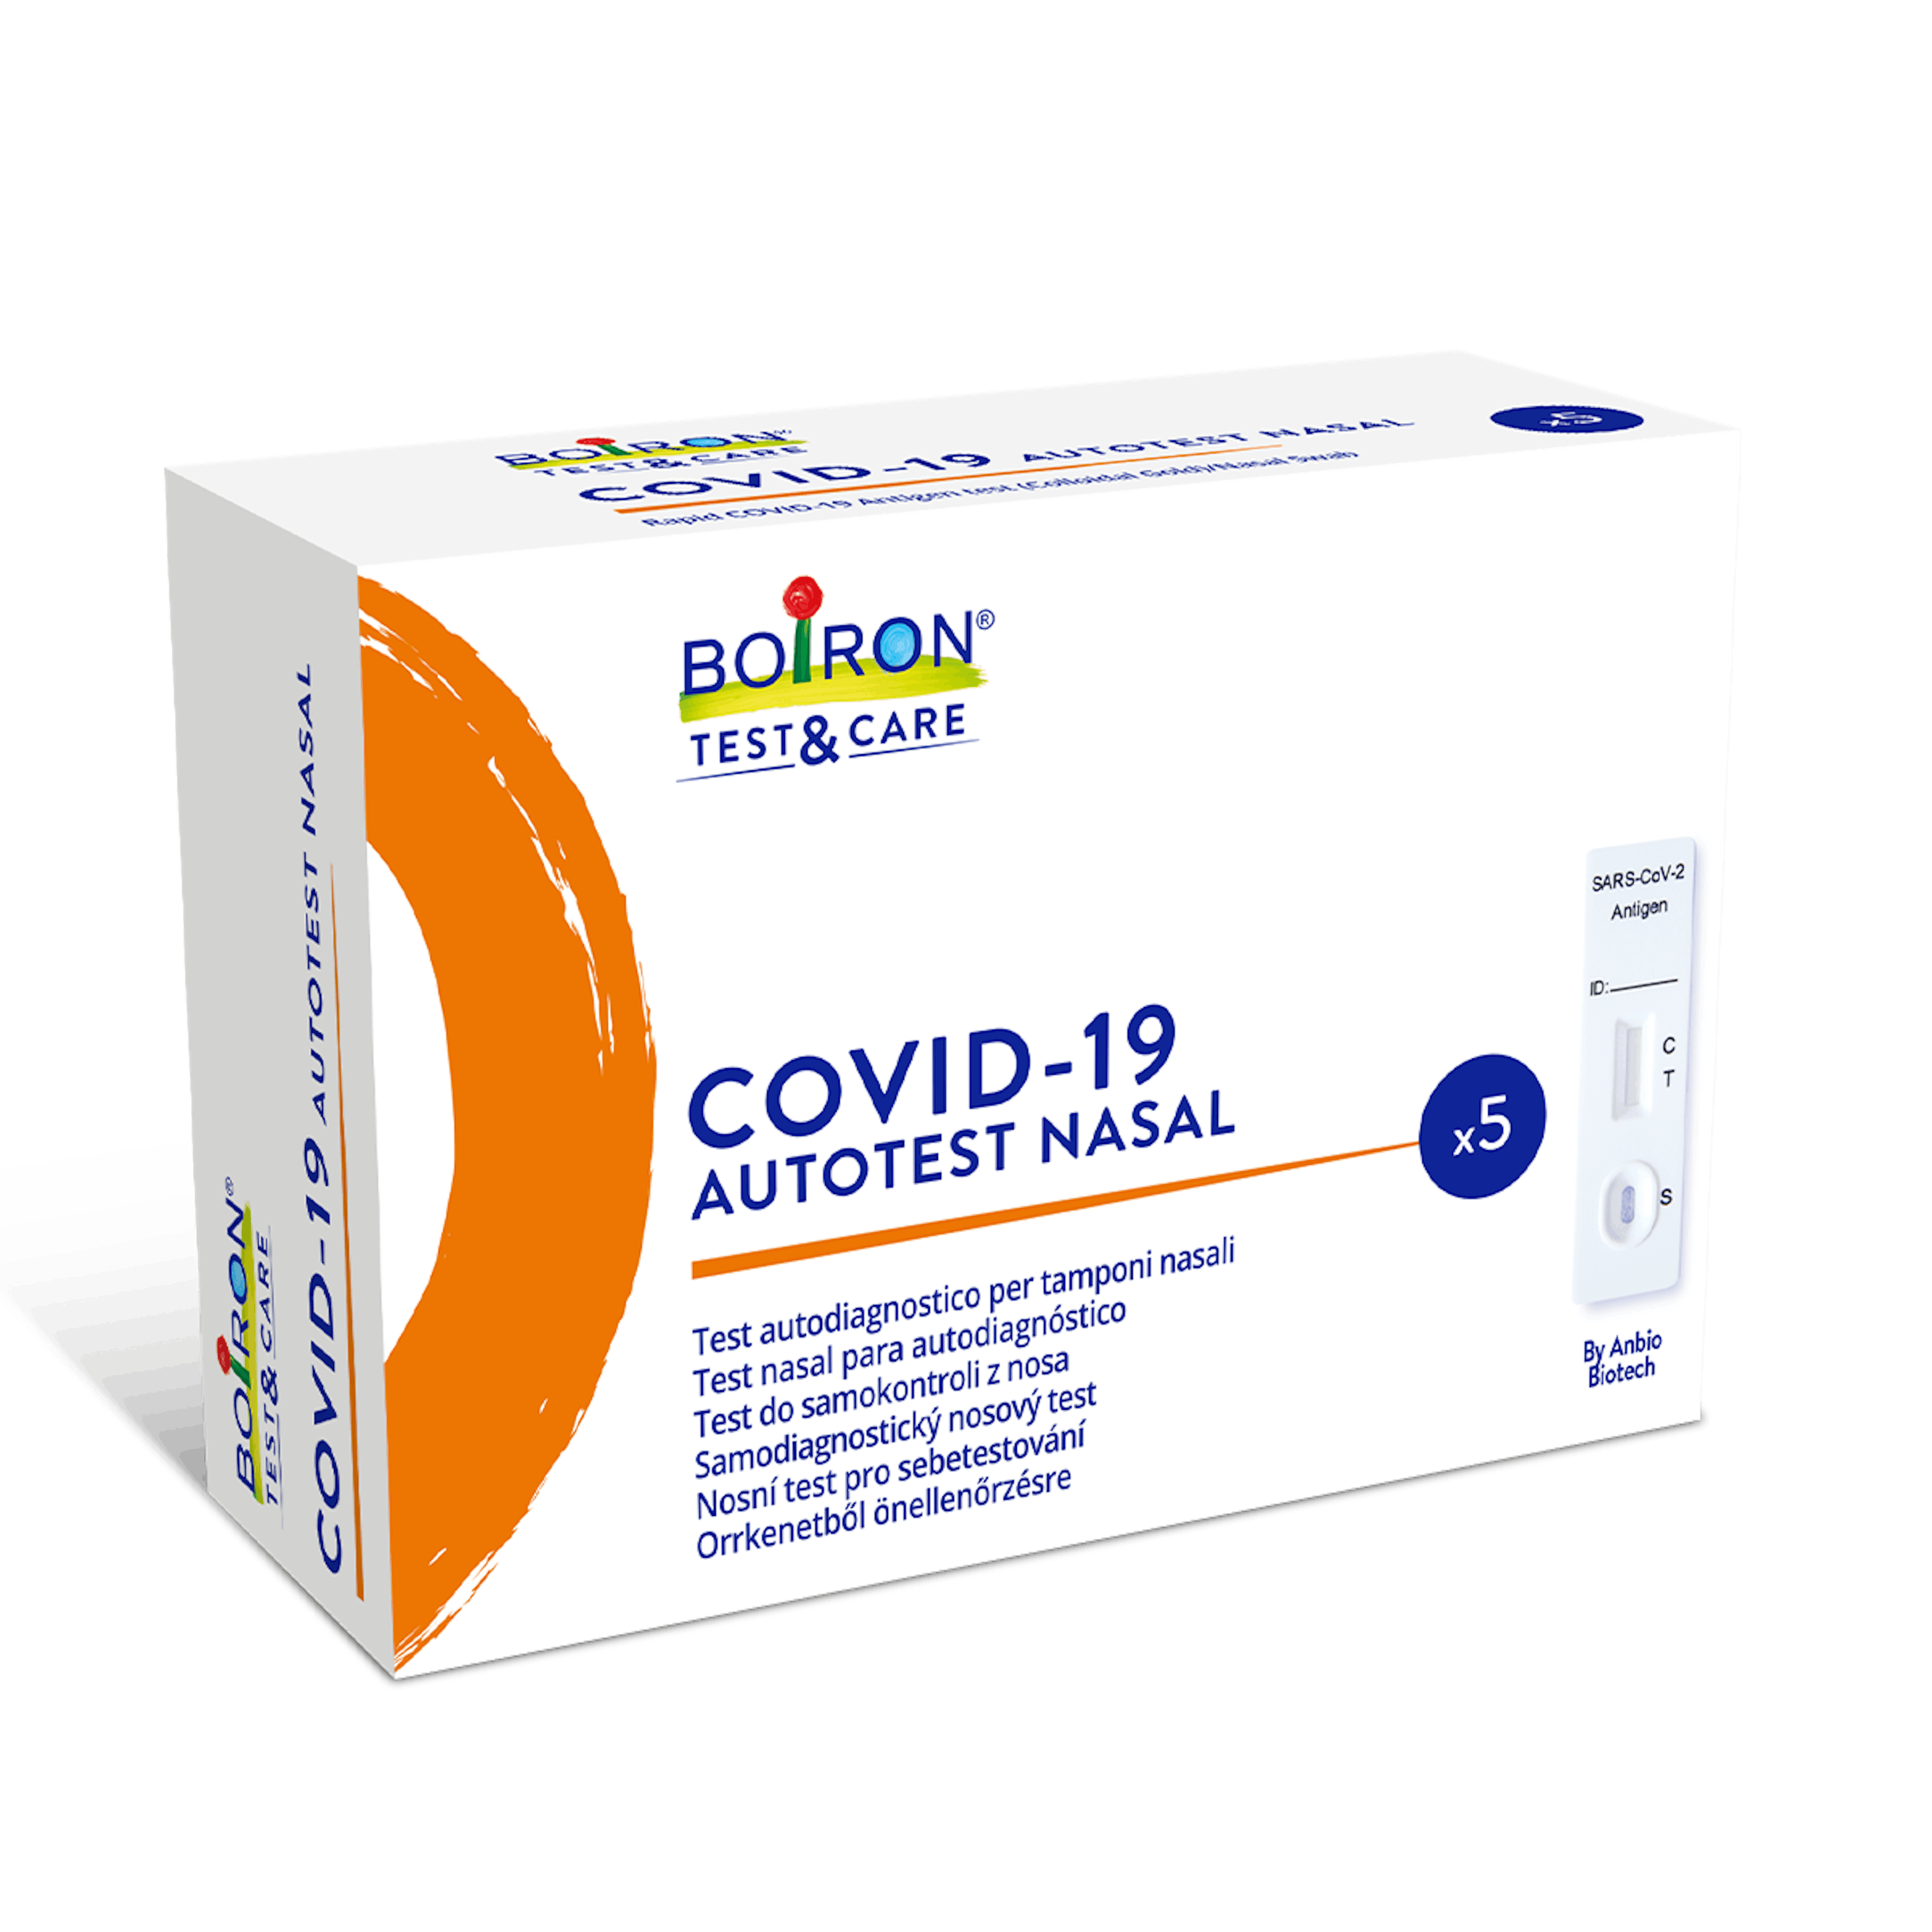 boiron test and care covid 19 autotest nasal 5